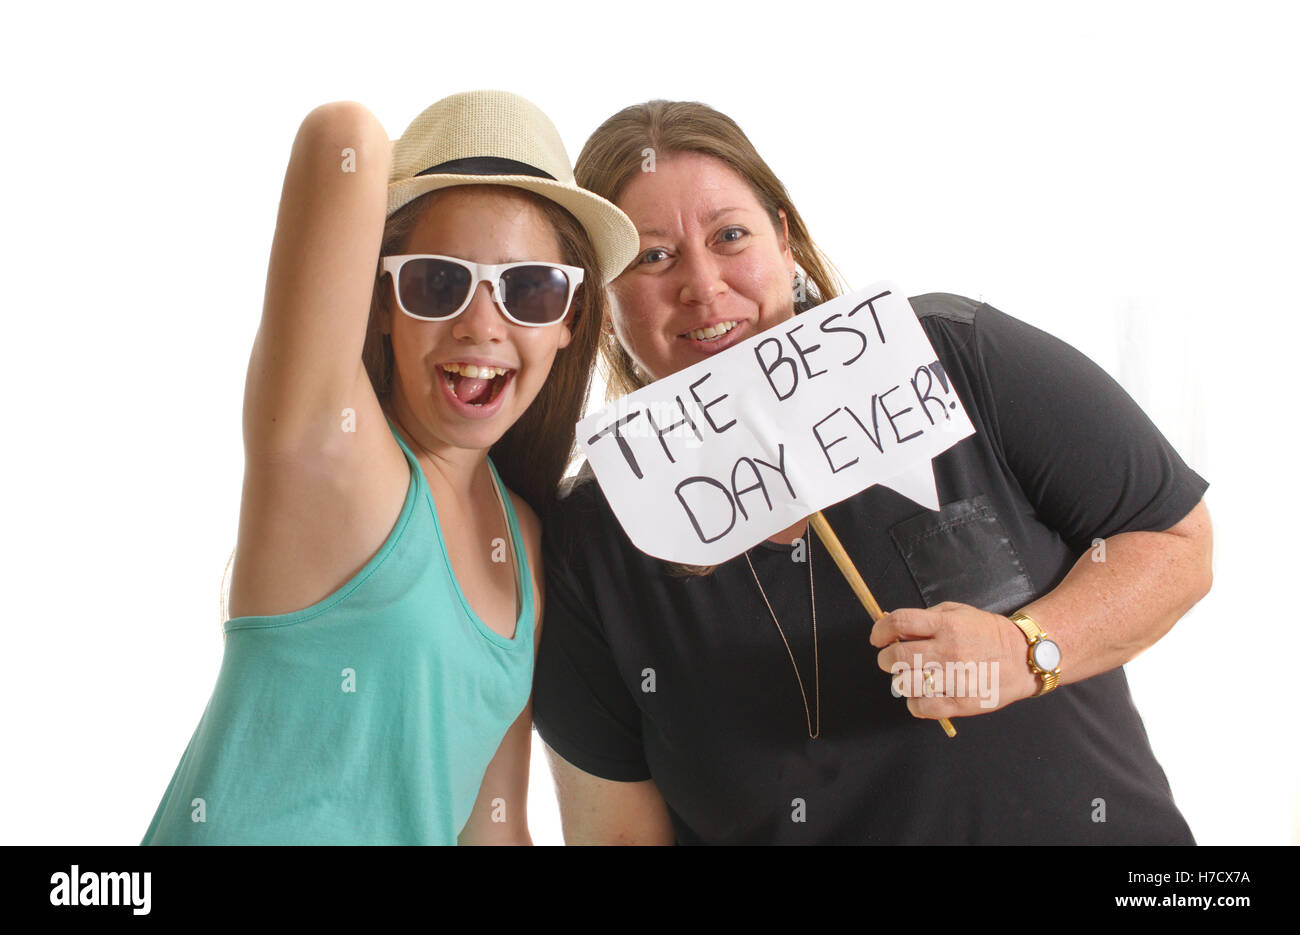 Mother and daughter having the Best Day Ever - holding a sign Stock Photo